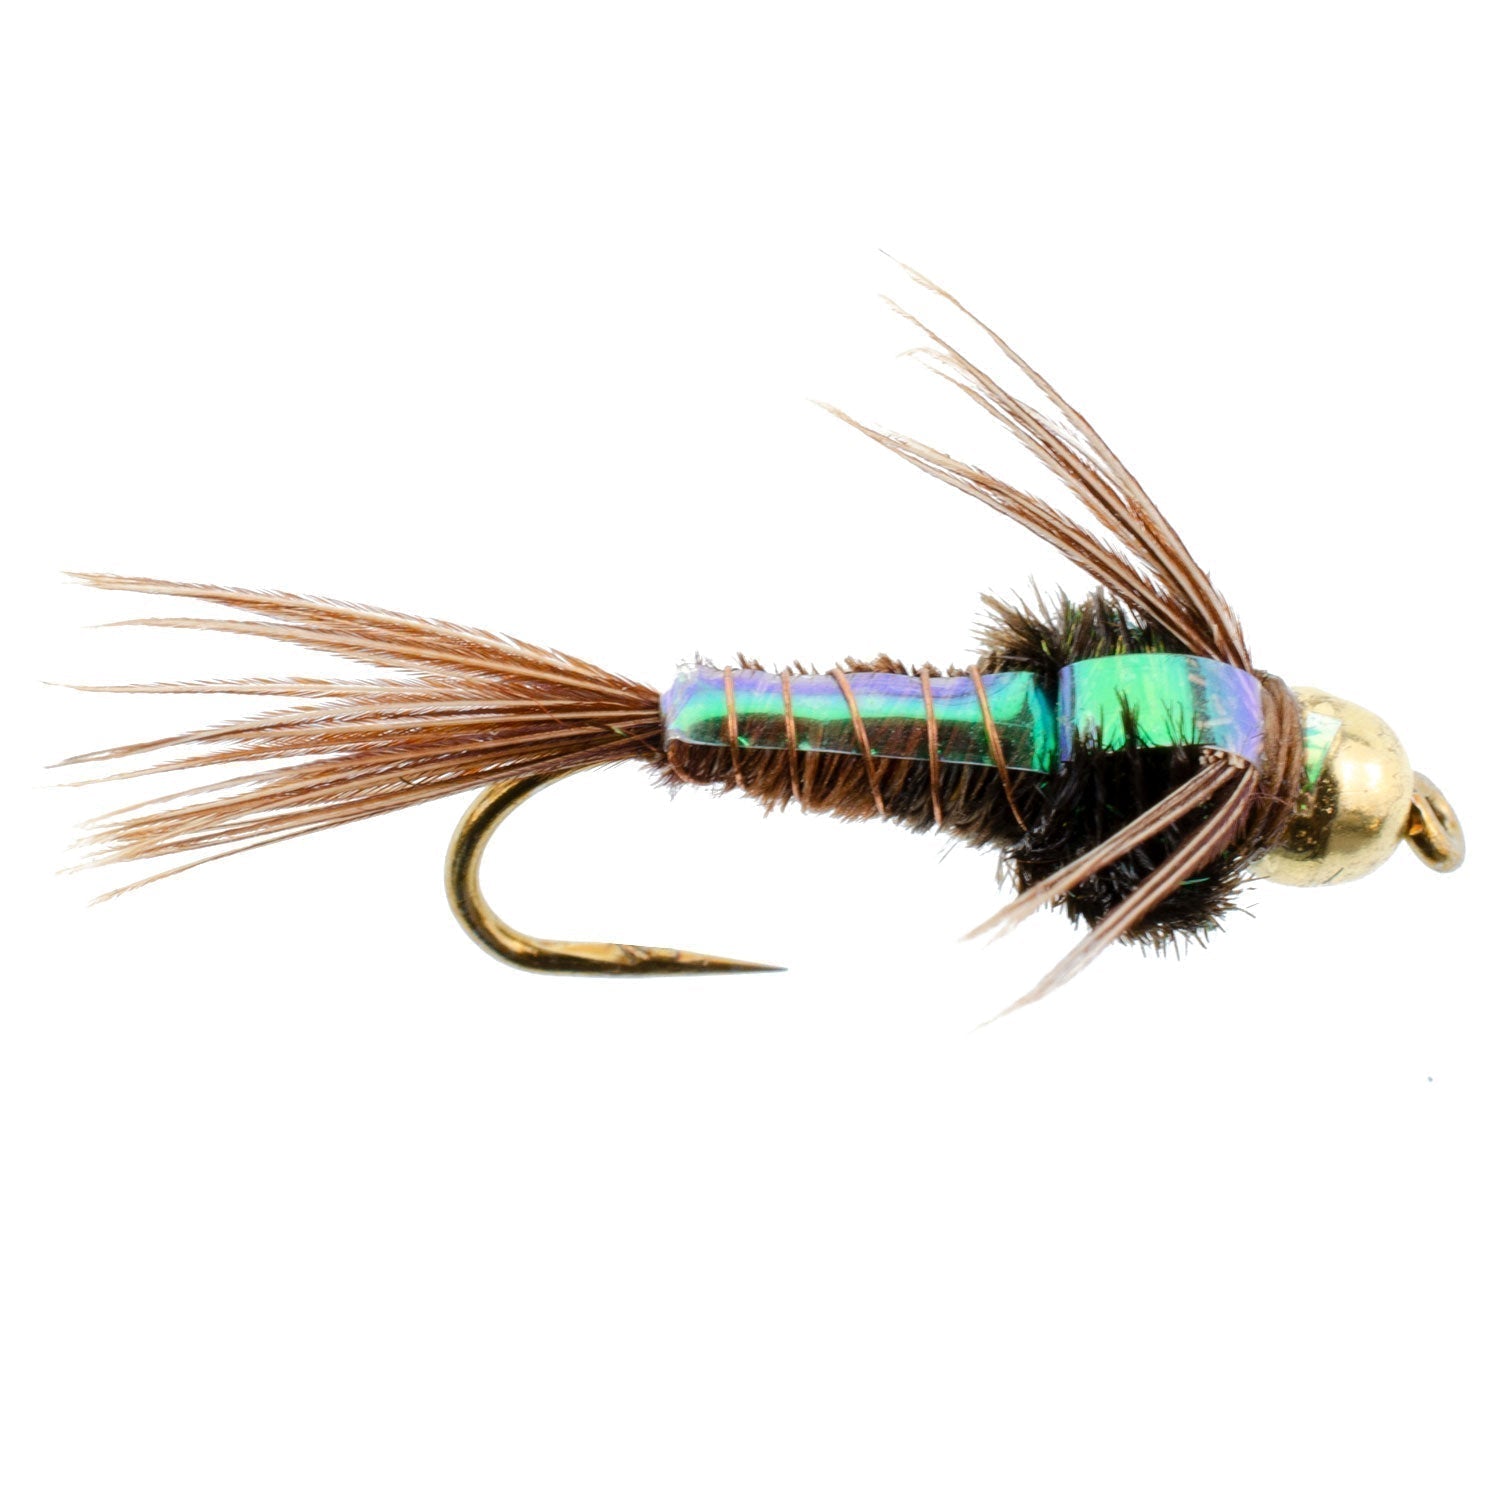 3 Pack Barbless Bead Head Flashback Pheasant Tail Nymph Flies Hook Size 14